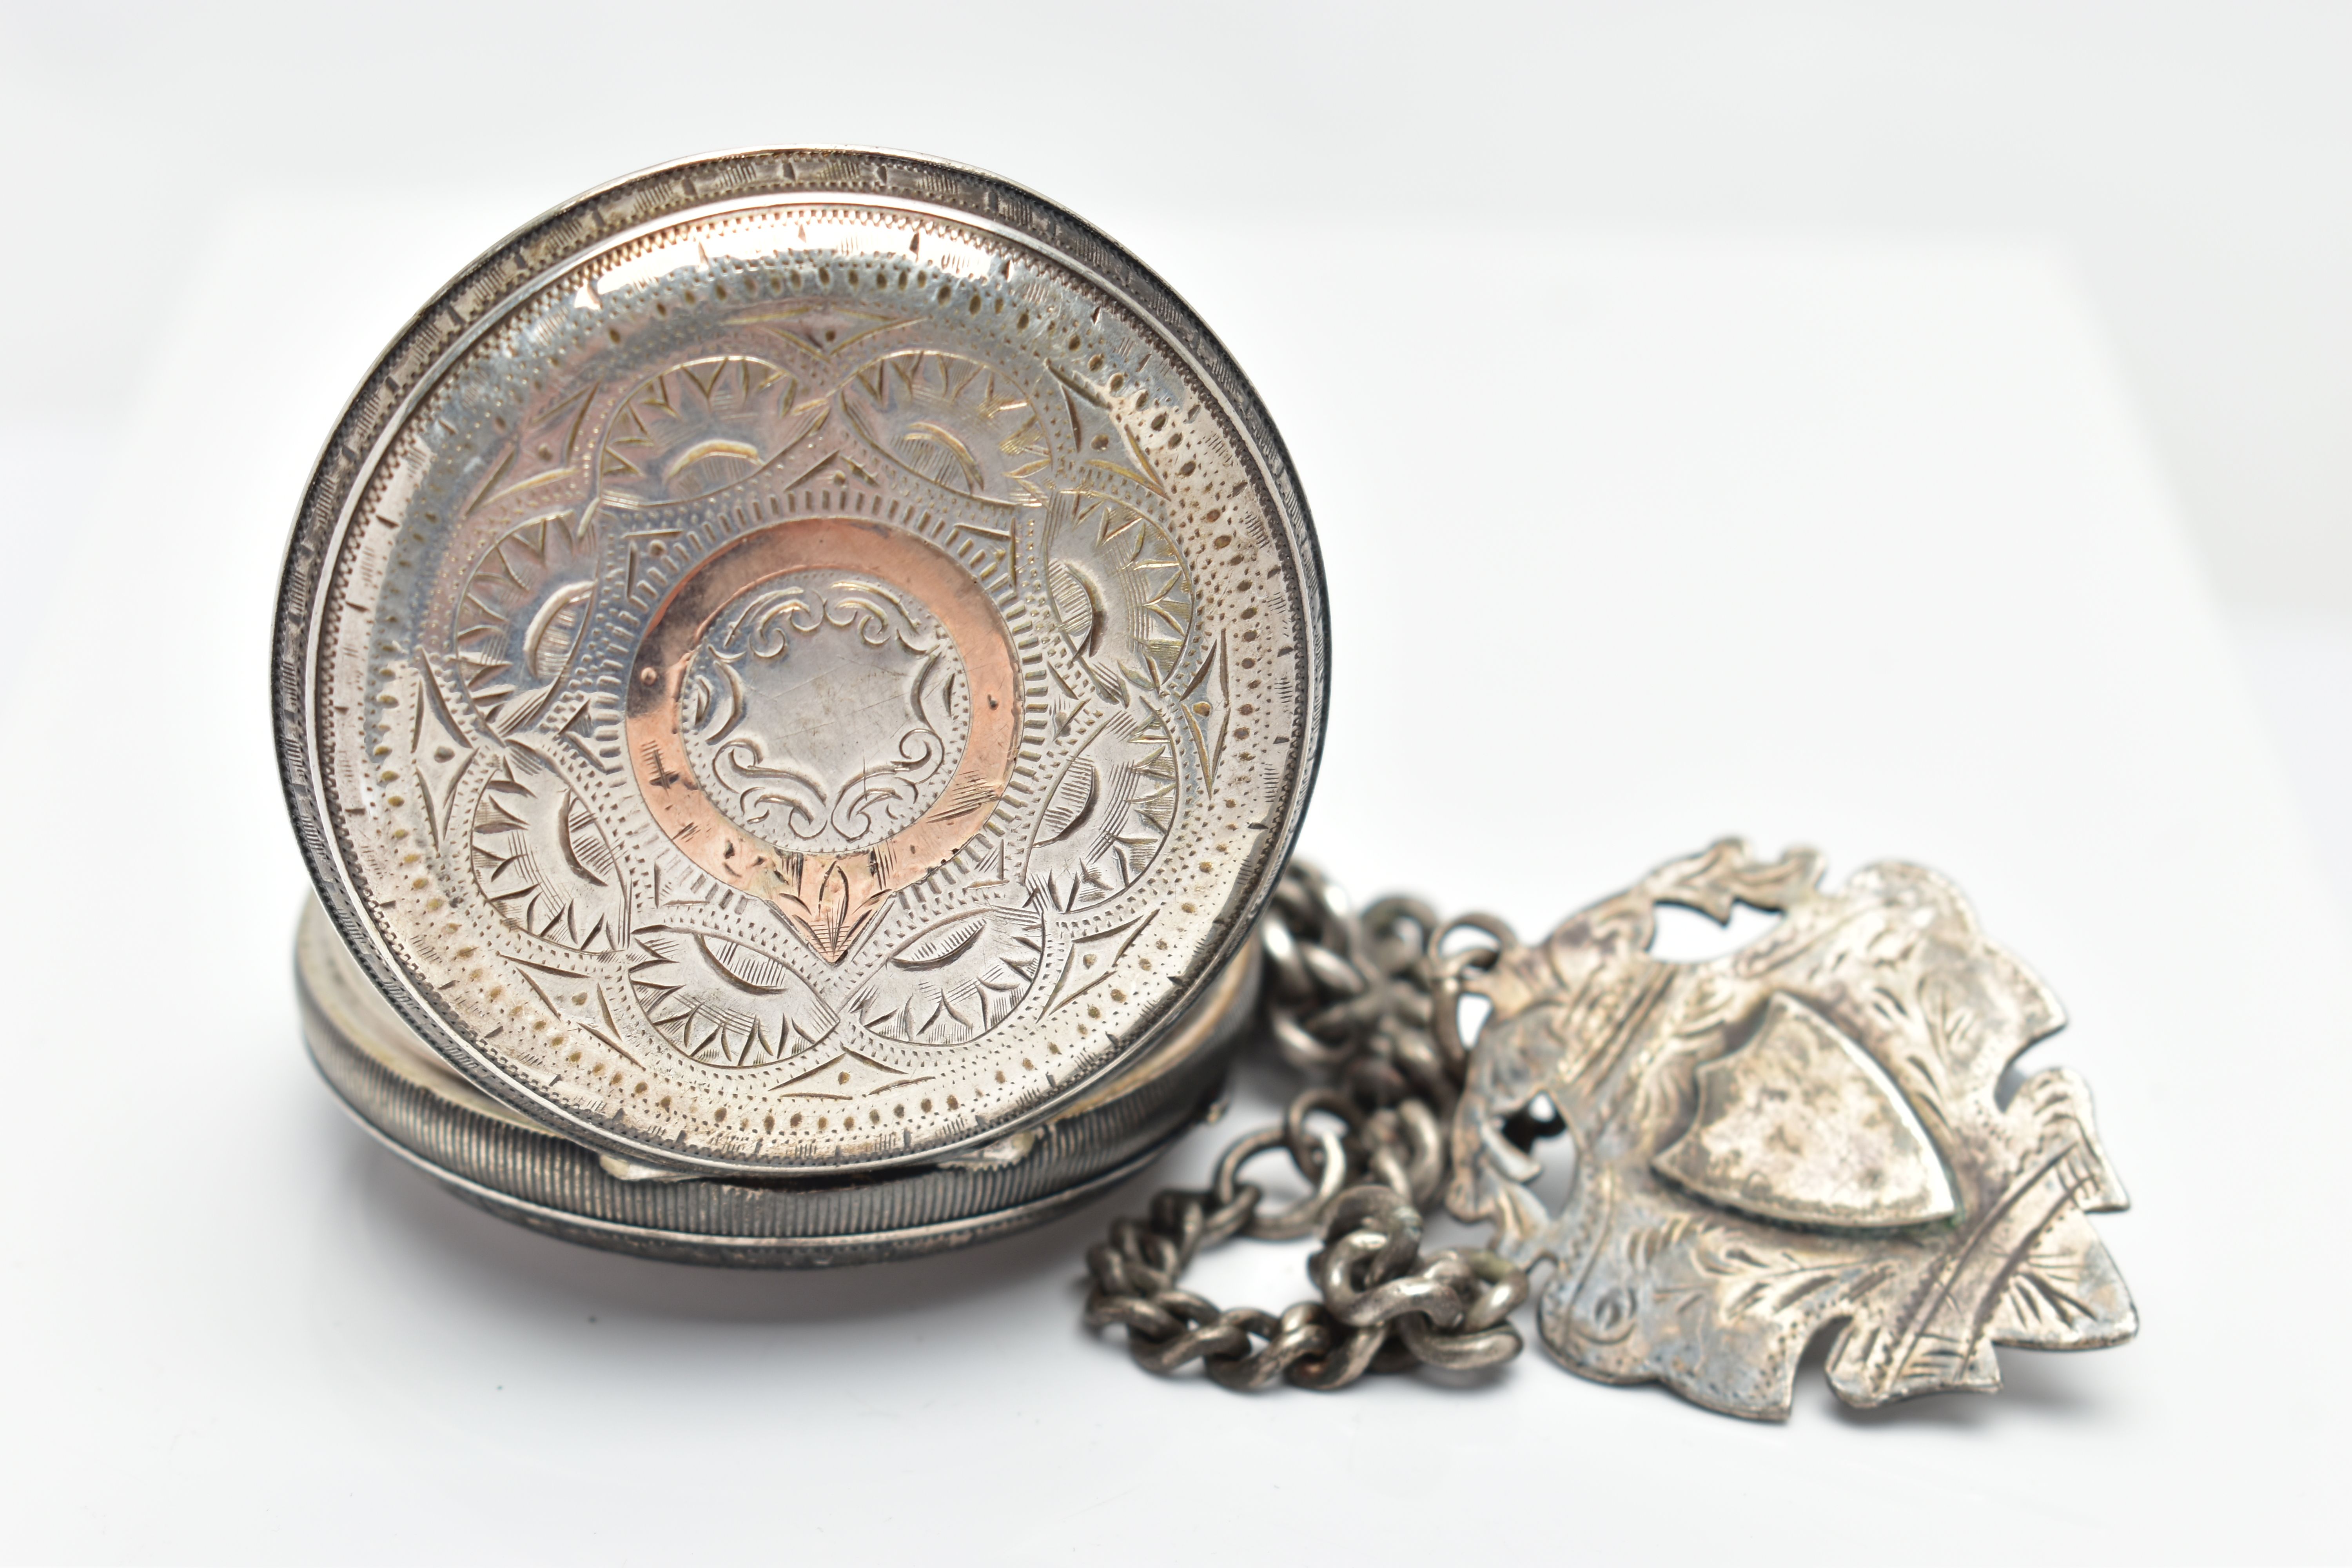 AN EARLY 20TH CENTURY OPEN FACE POCKET WATCH AND ALBERT CHAIN, the key wound pocket watch with a - Image 3 of 8